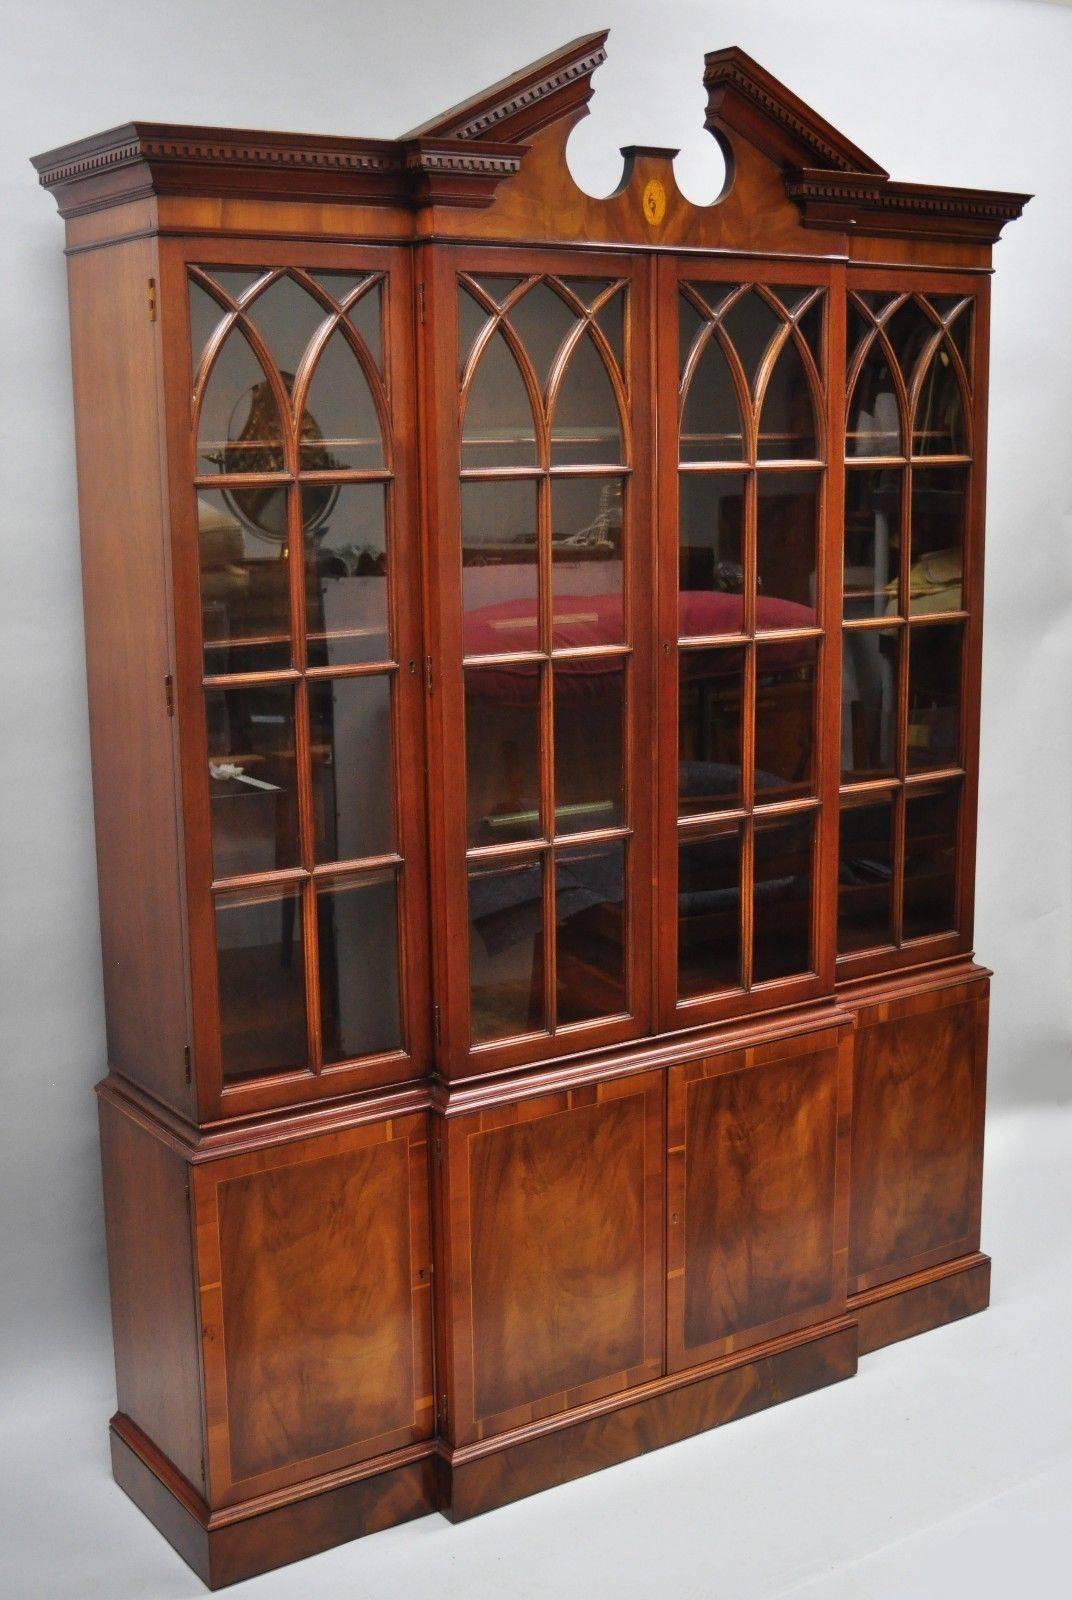 Drexel Wallace nutting mahogany breakfront, China cabinet Chippendale style. Item features individual panes of glass, beautiful woodgrain, two part construction, lighted interior, original label, working lock and key, three dovetailed drawers,